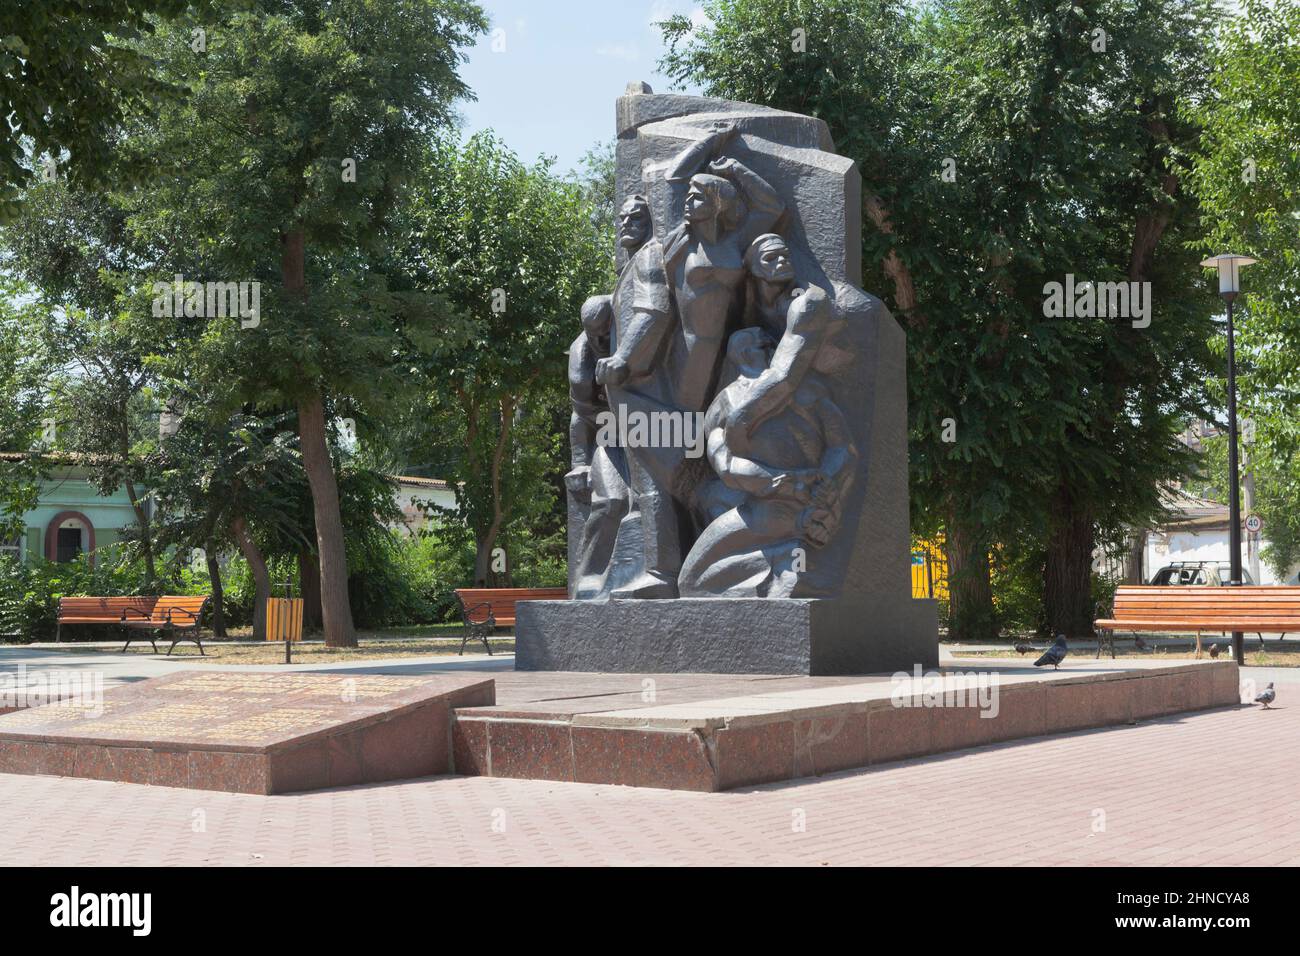 Evpatoria, Crimea, Russia - July 19, 2021: Monument on the mass grave, who died in the struggle for the establishment of Soviet power in the city of E Stock Photo